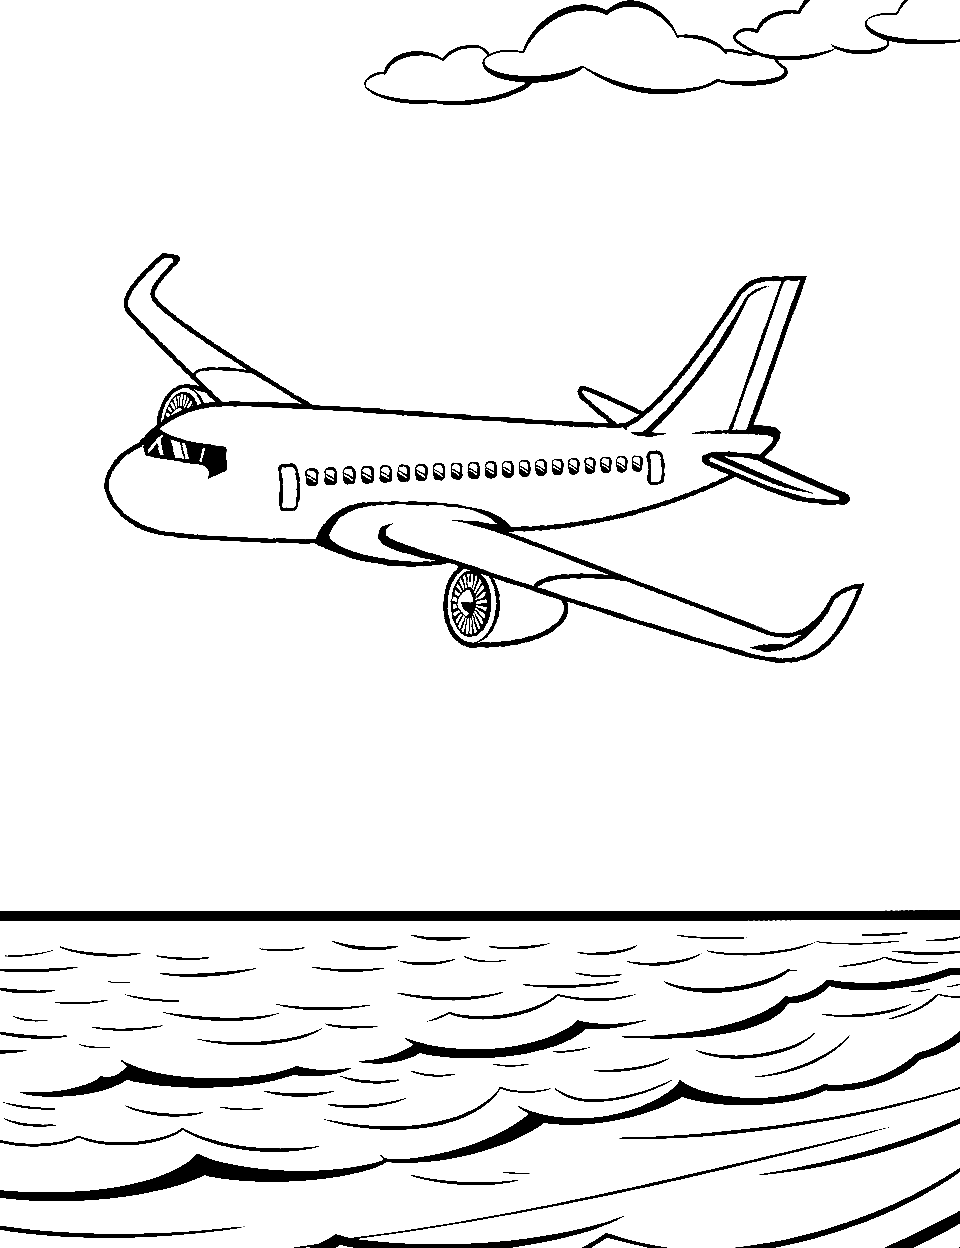 Flying Over the Ocean Airplane Coloring Page - An airplane flying low over a crystal blue ocean.